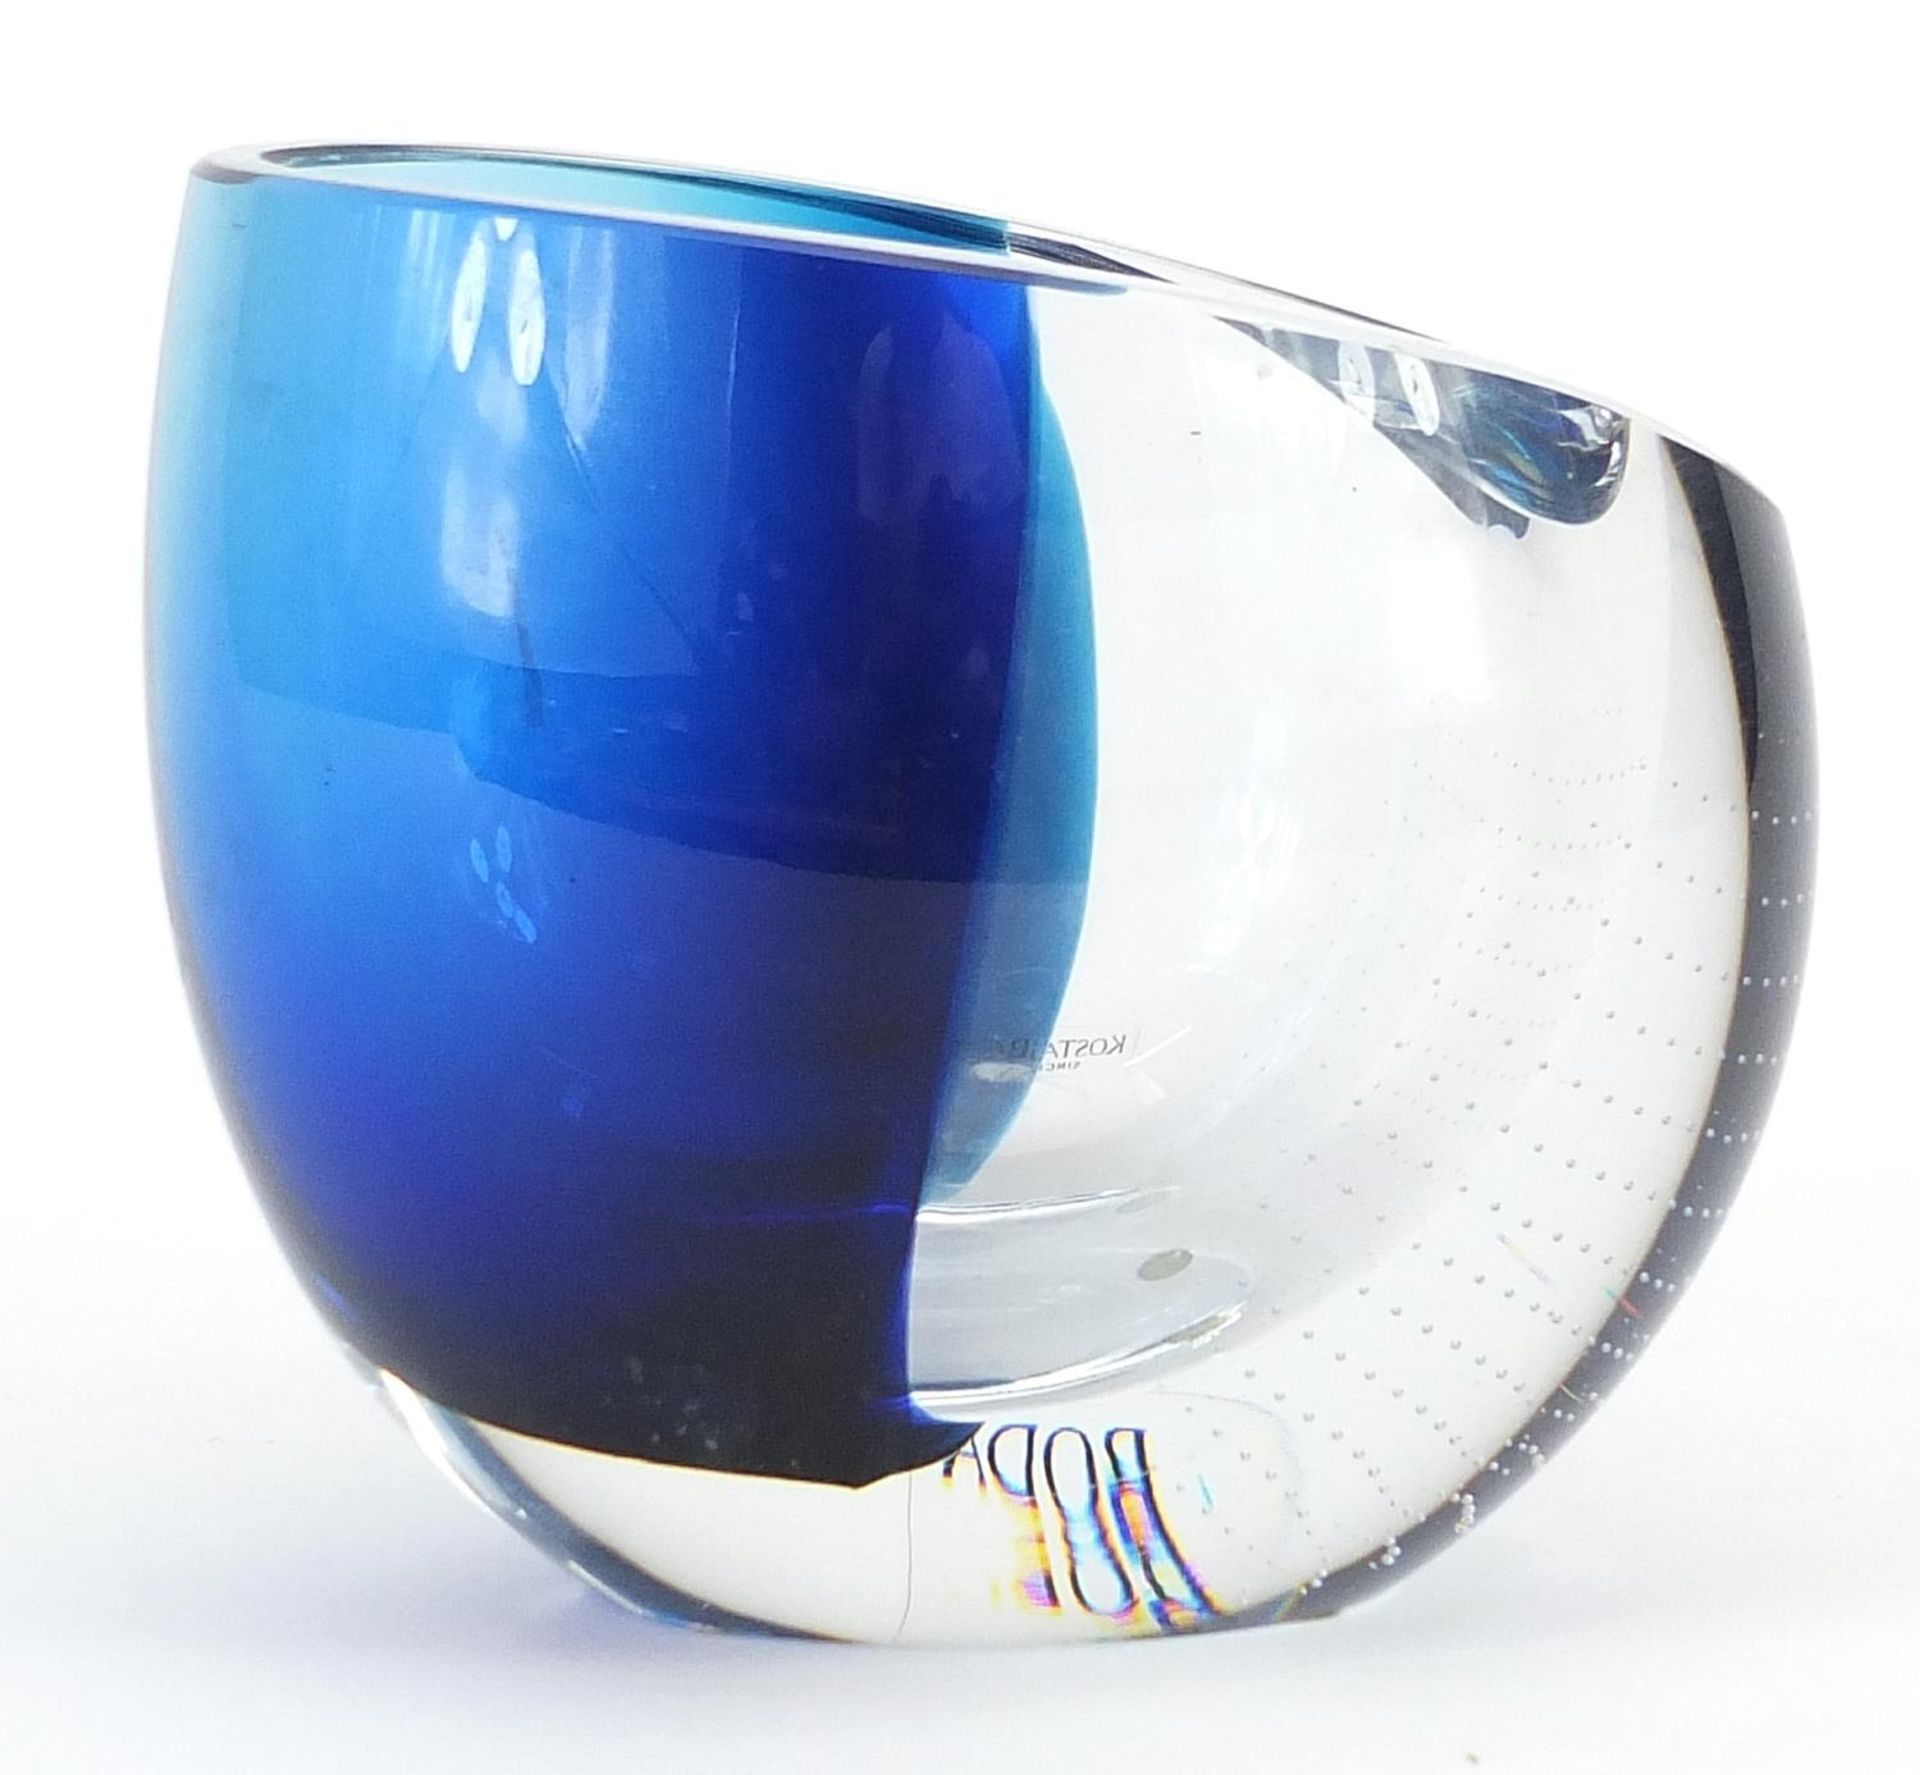 Goran Warff for Kosta Boda, Swedish blue and clear art glass vase, signed to the base, 12.5cm high